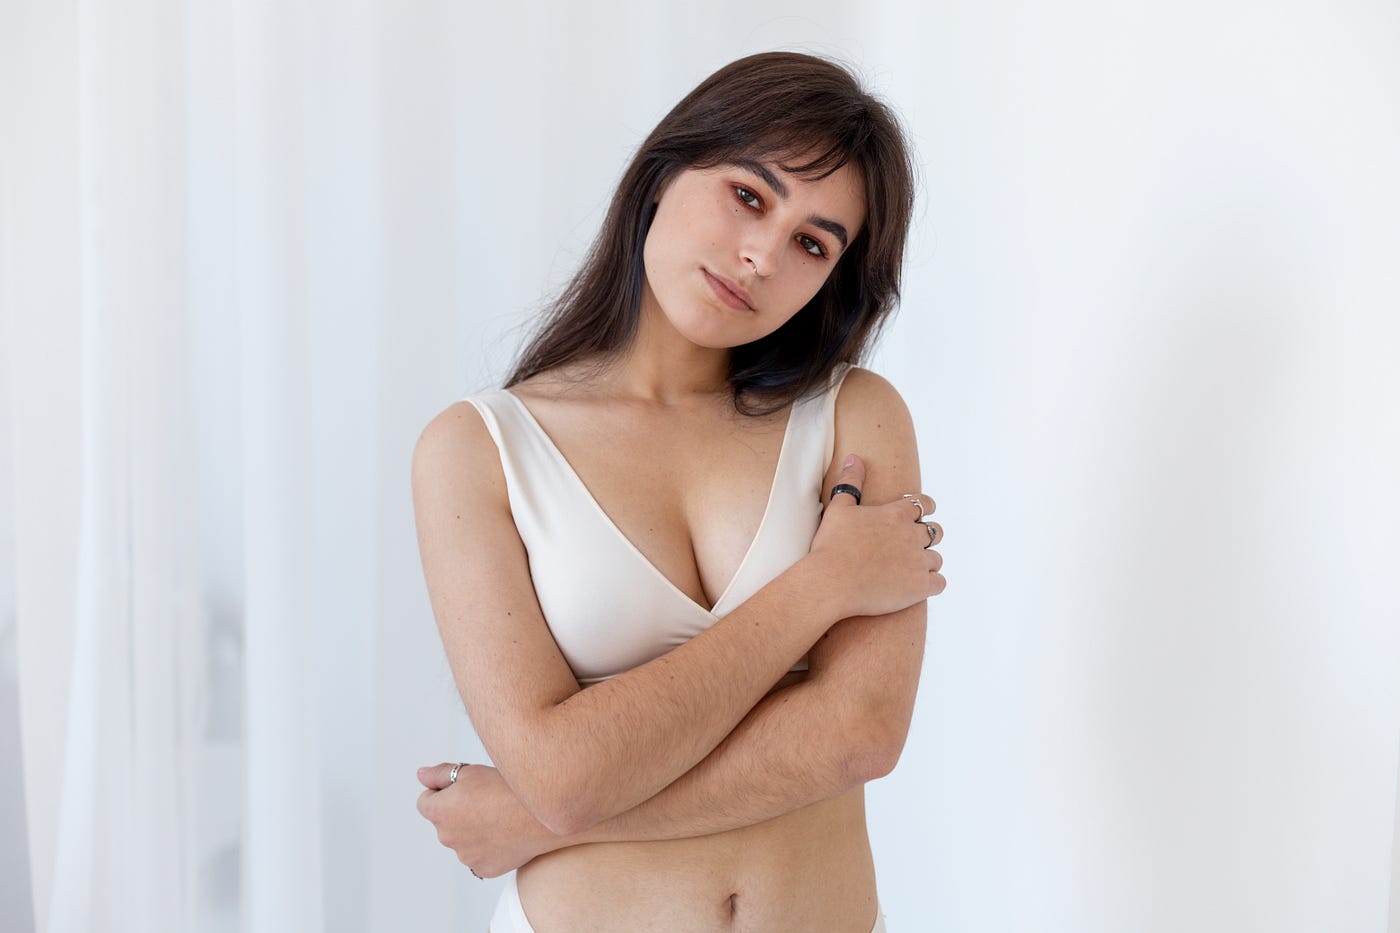 How to Fix Sagging Breasts  Procedures for Perky Breasts